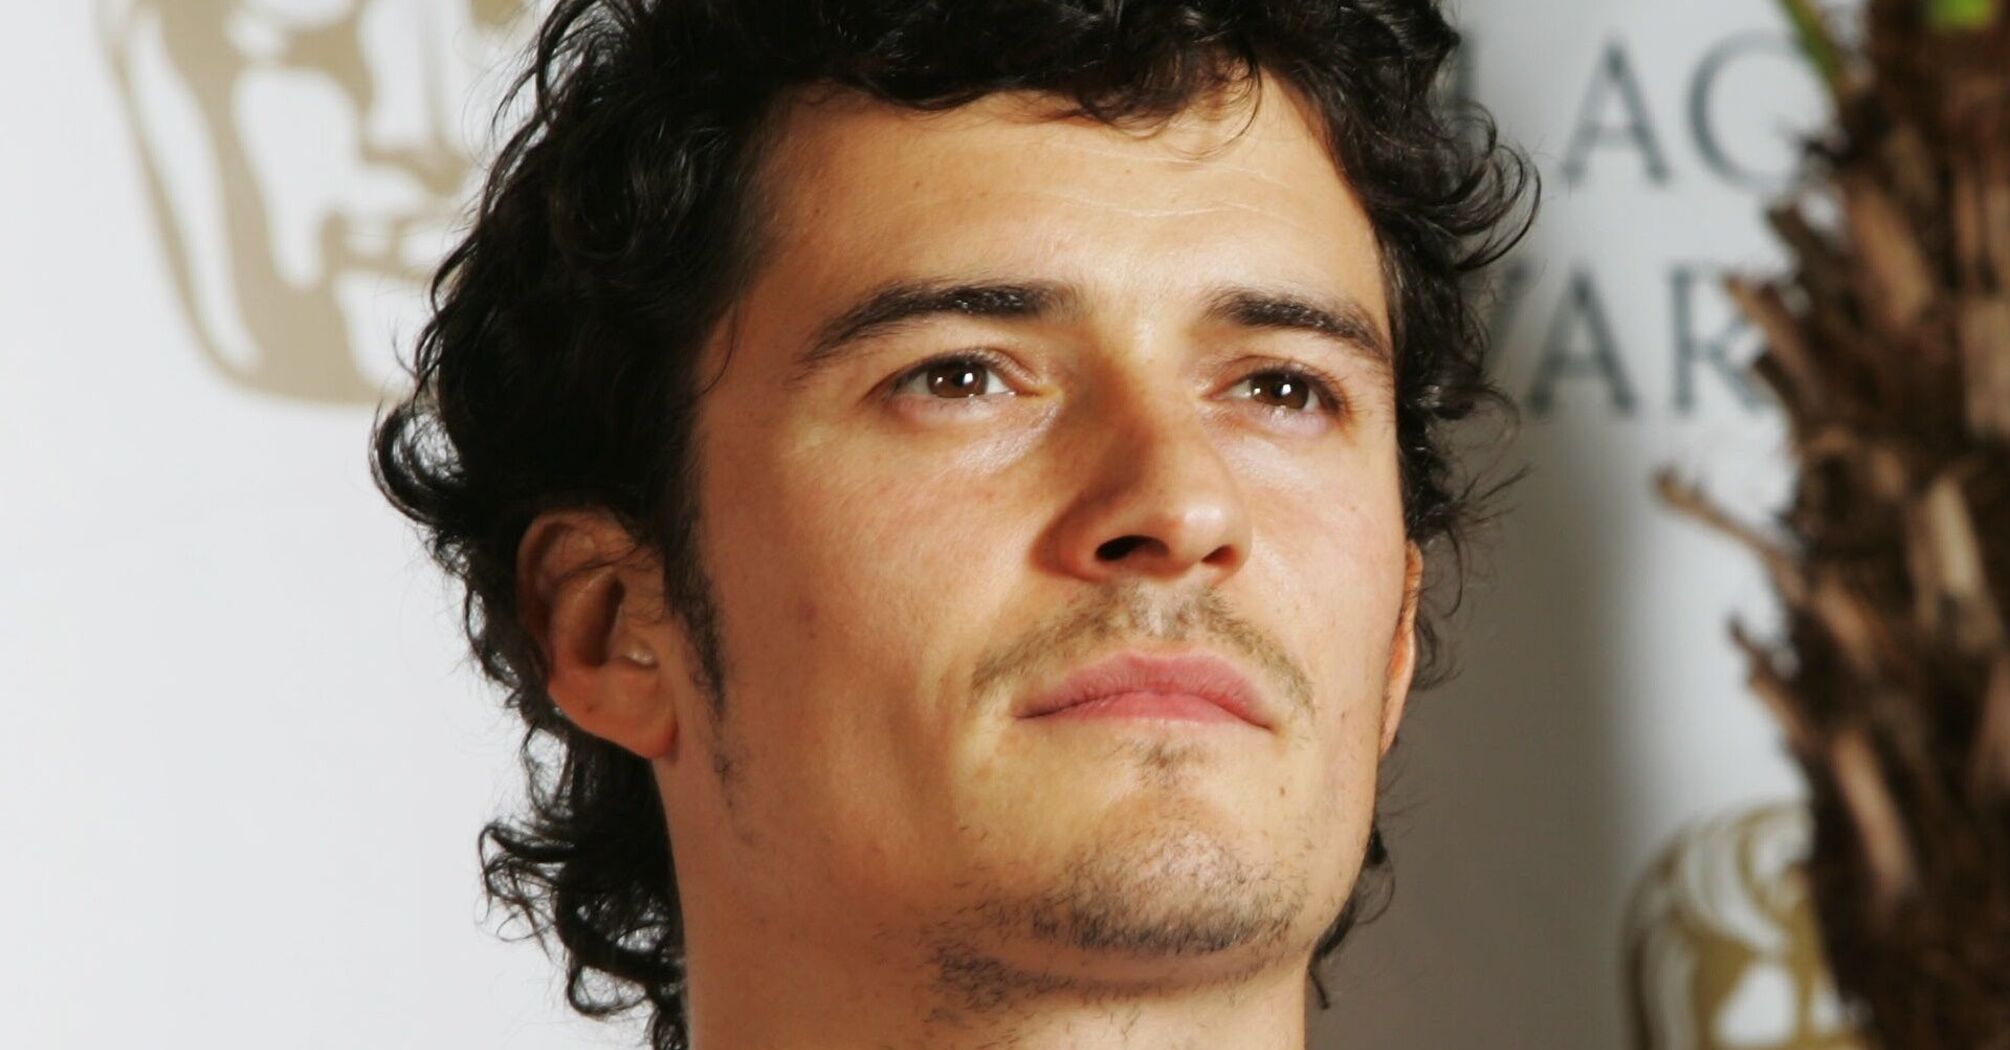 5 interesting facts about Orlando Bloom